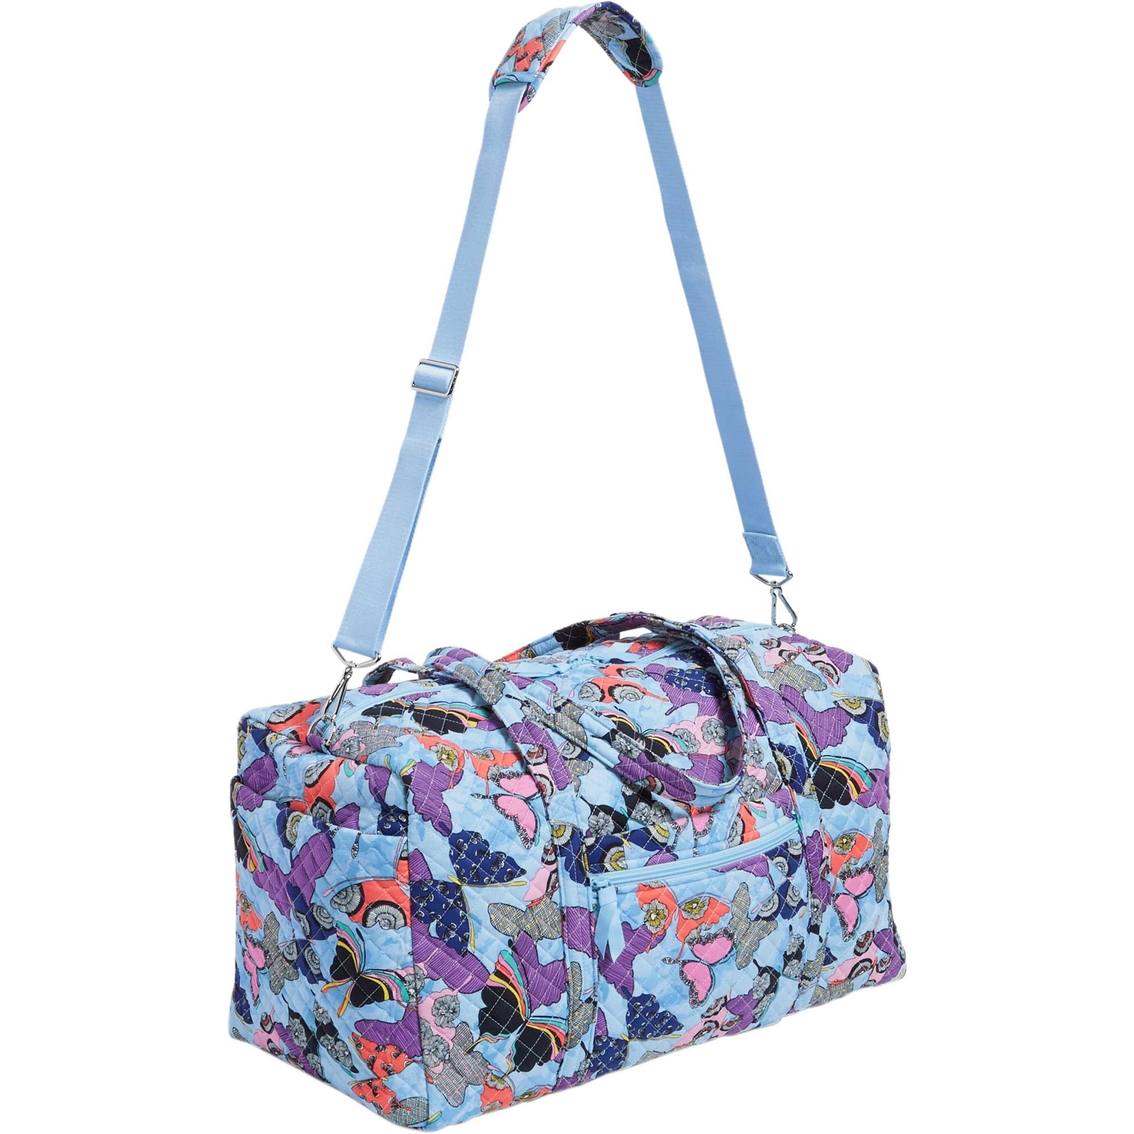 Vera Bradley Signature Cotton Large Travel Duffel Bag, Butterfly By - Image 2 of 3